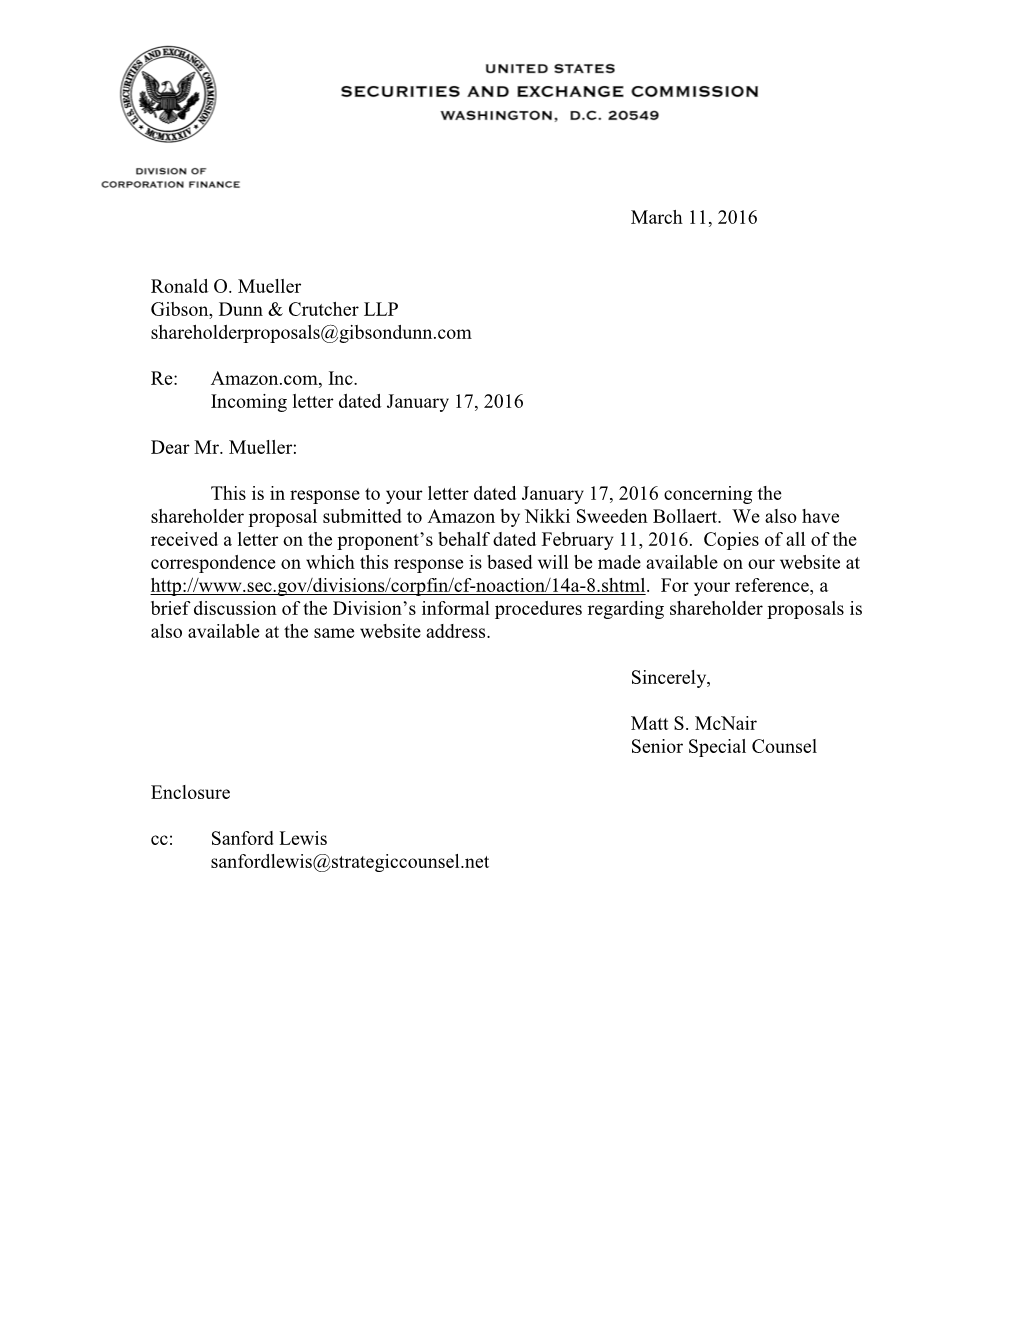 Amazon.Com, Inc. Incoming Letter Dated January 17, 2016